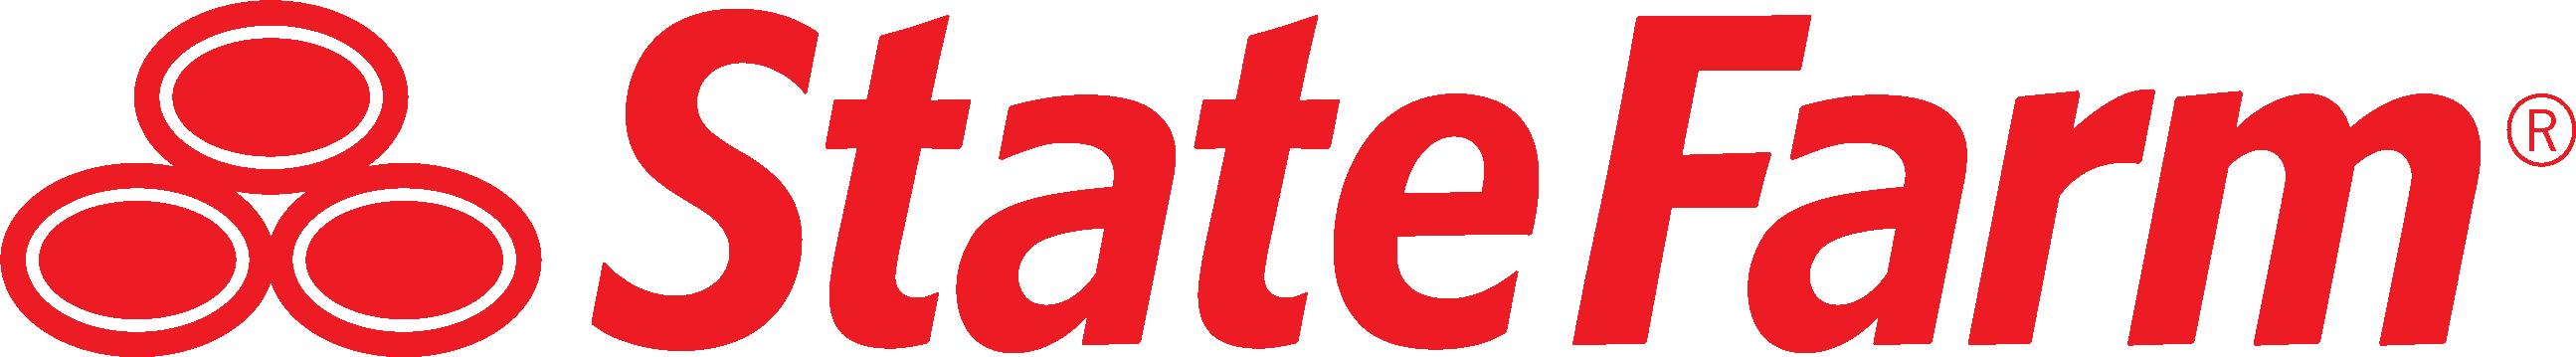 A red logo that says " bates ".